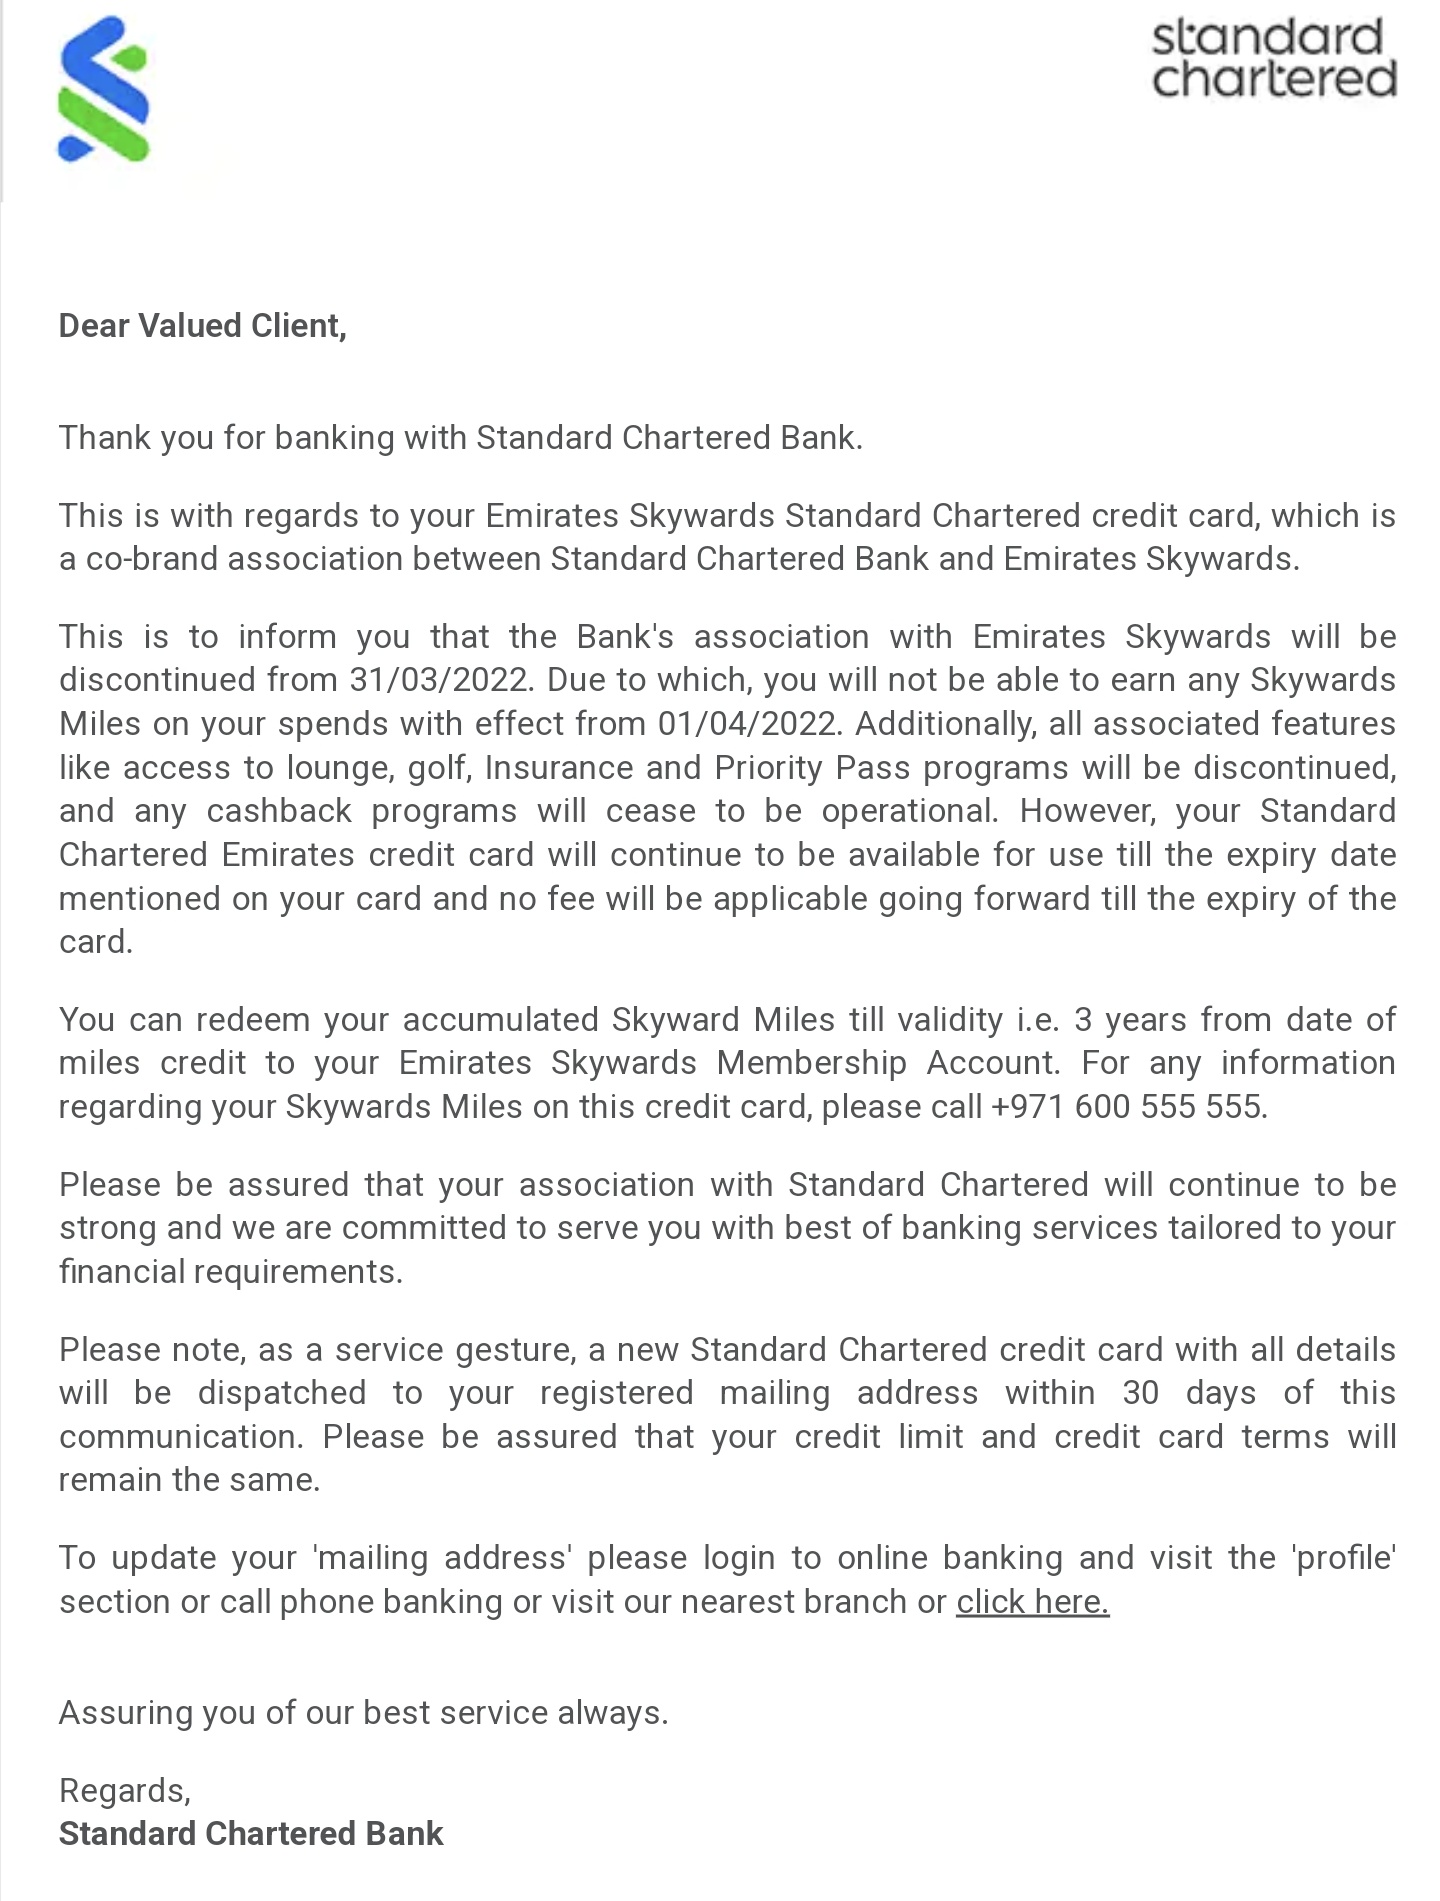 Emirates Skywards Standard Chartered Credit Card Discontinued